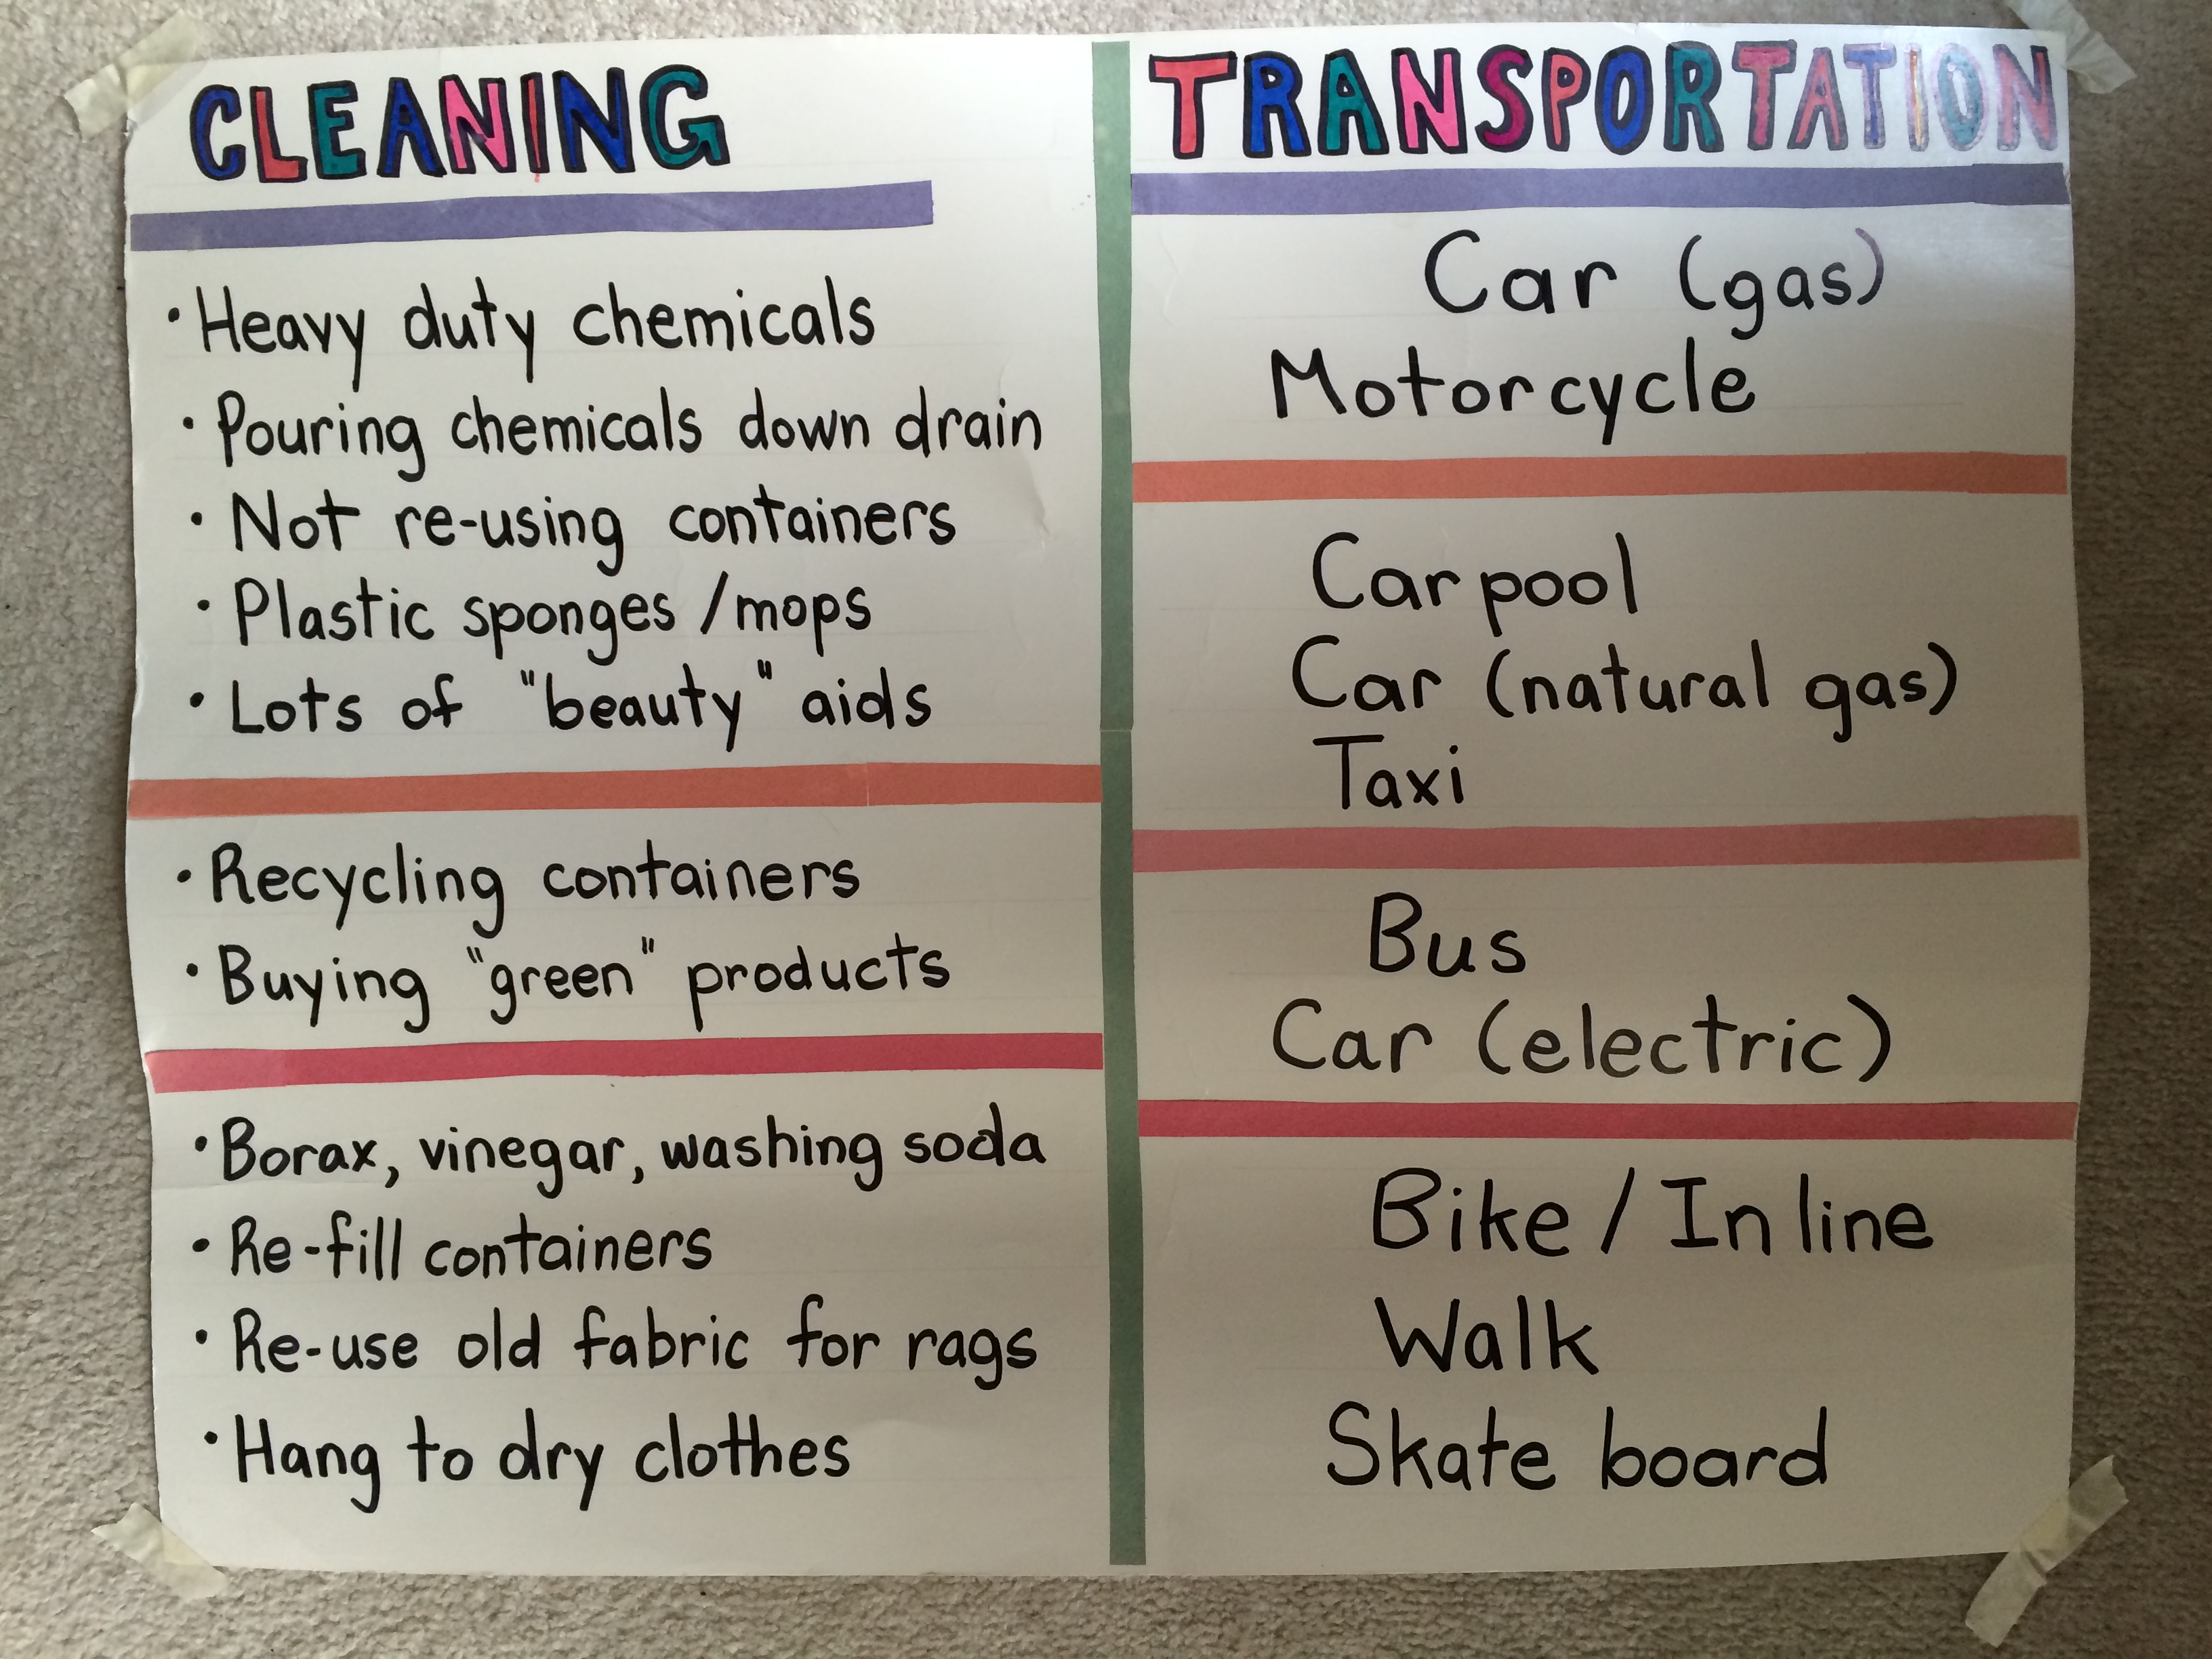 Cleaning & transportation green lifestyle tips - spectrum of choices from least green to most green - poster from ~1995